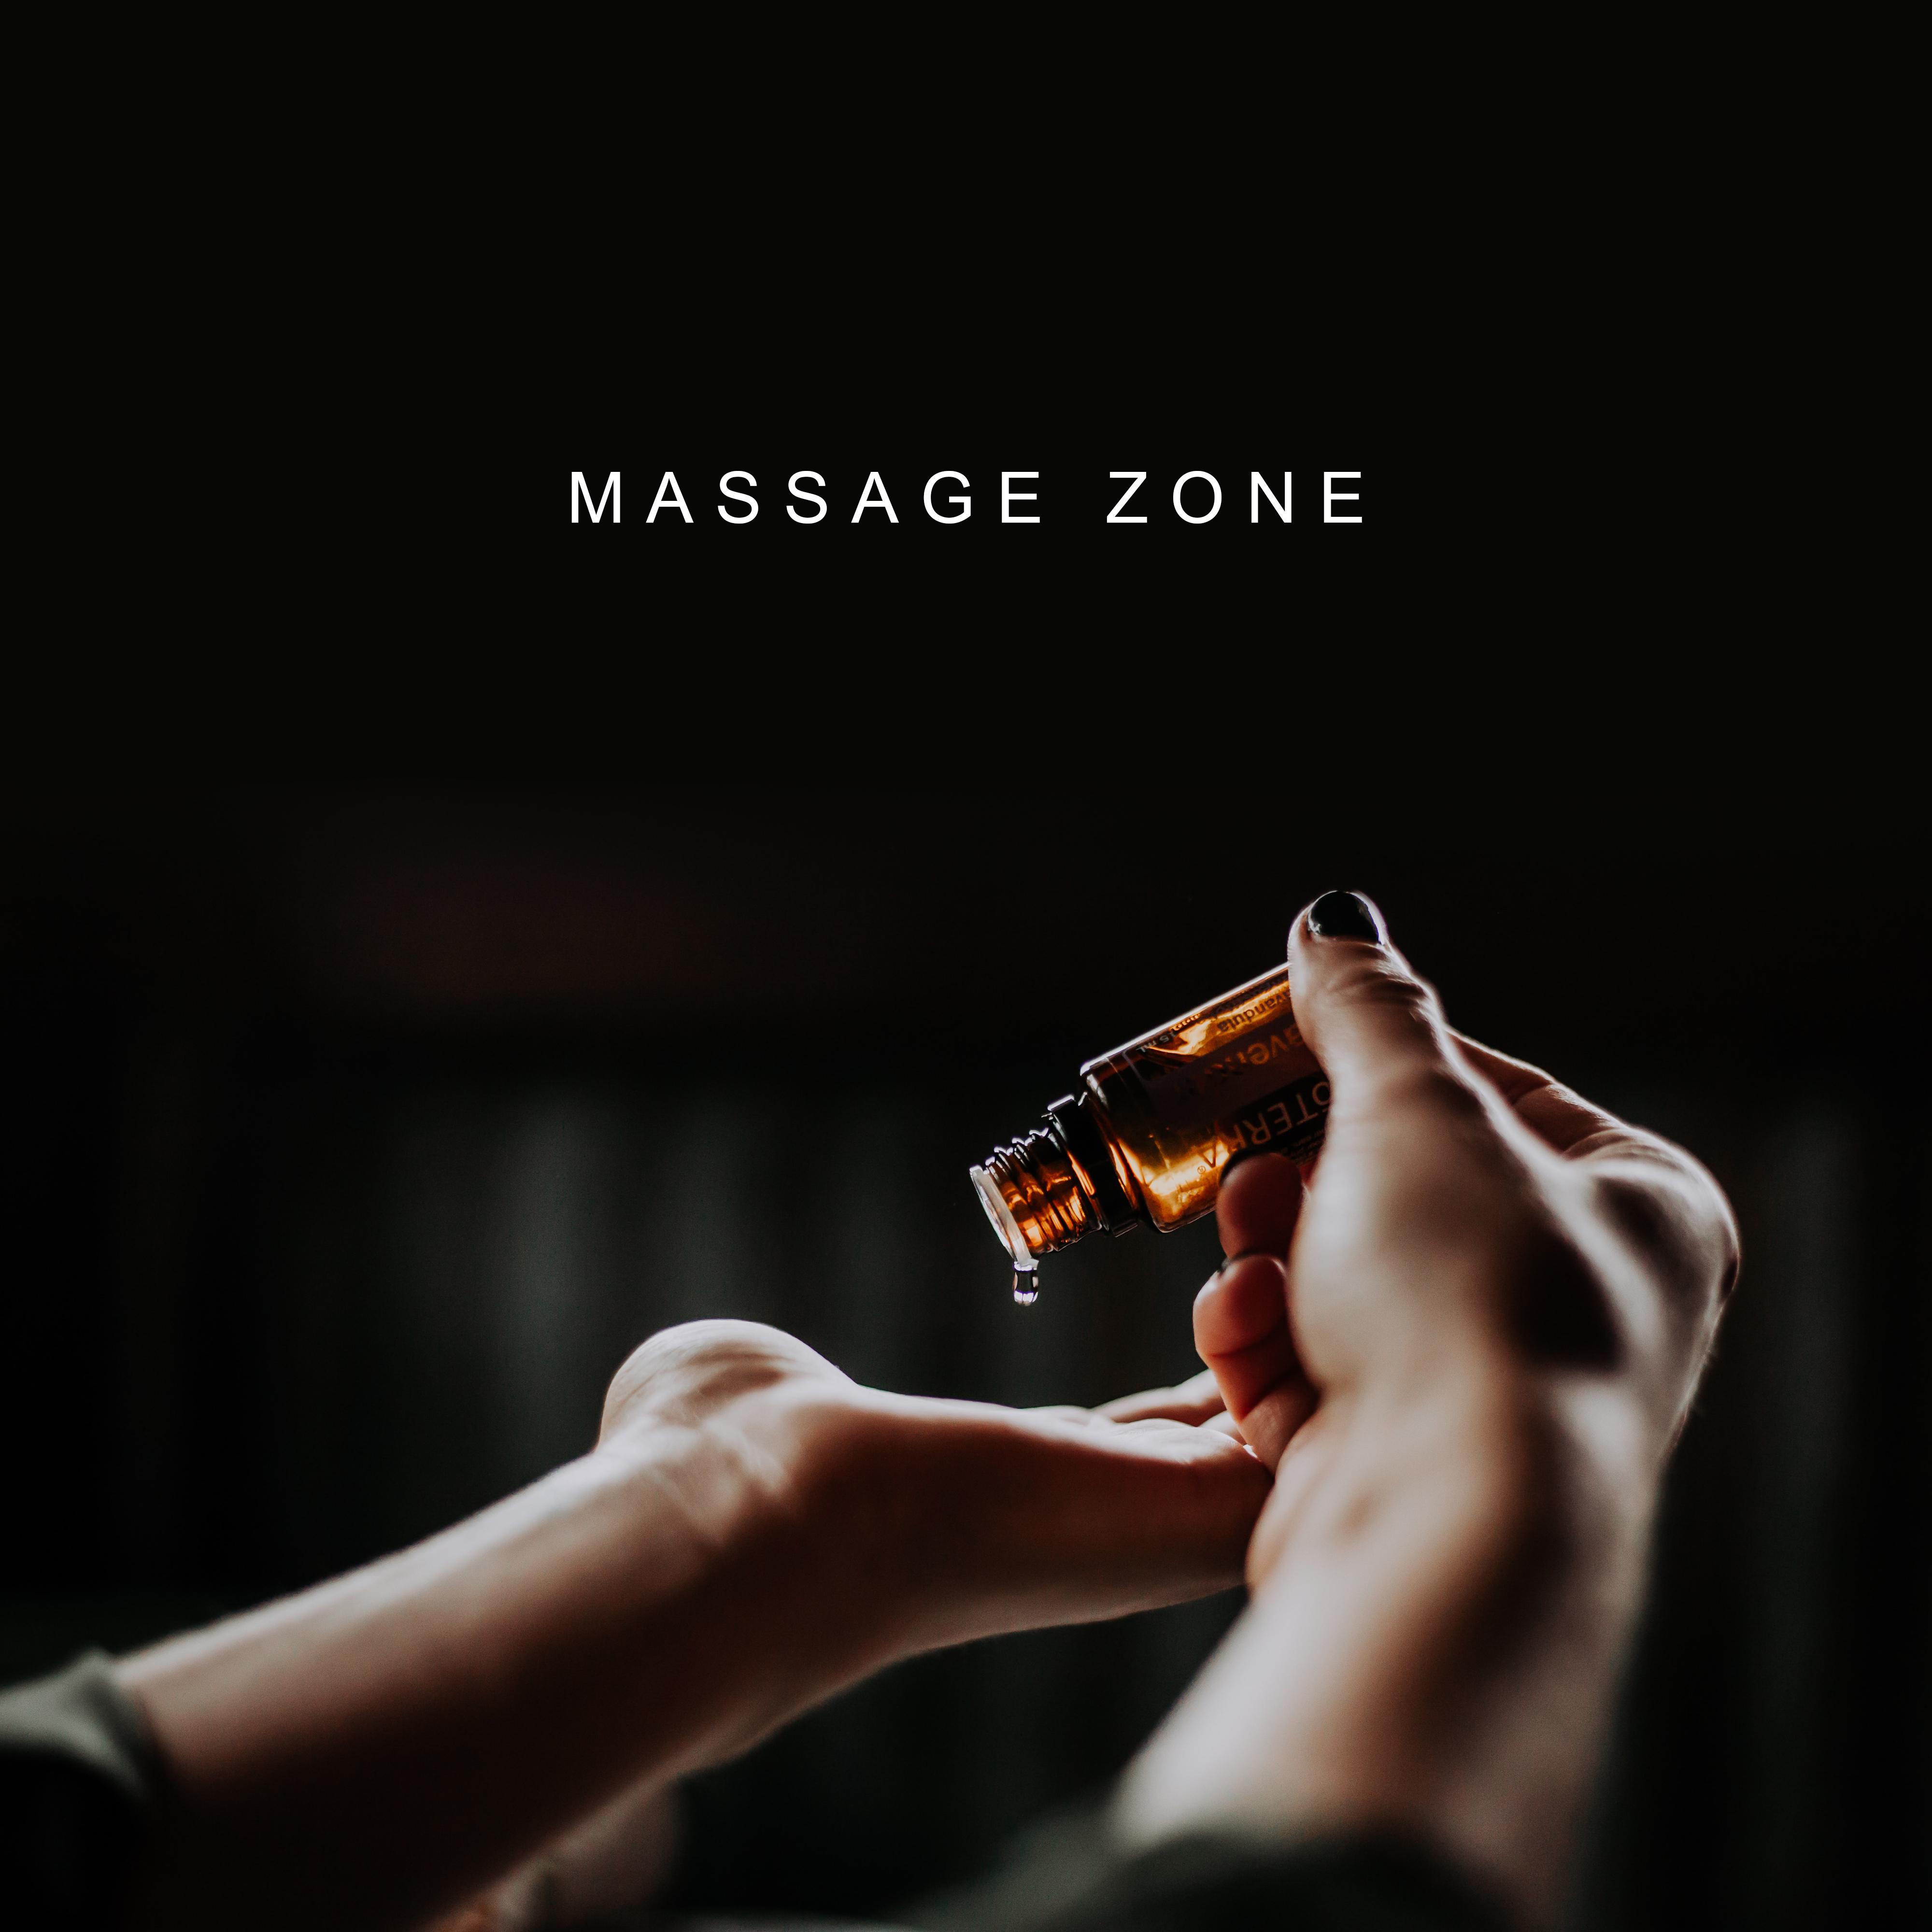 Massage Zone: Relaxing Music Therapy, Spa Zen, Soothing Sounds to Calm Down, Zen, Deep Meditation, Calm Sleep, Relief Music 2019